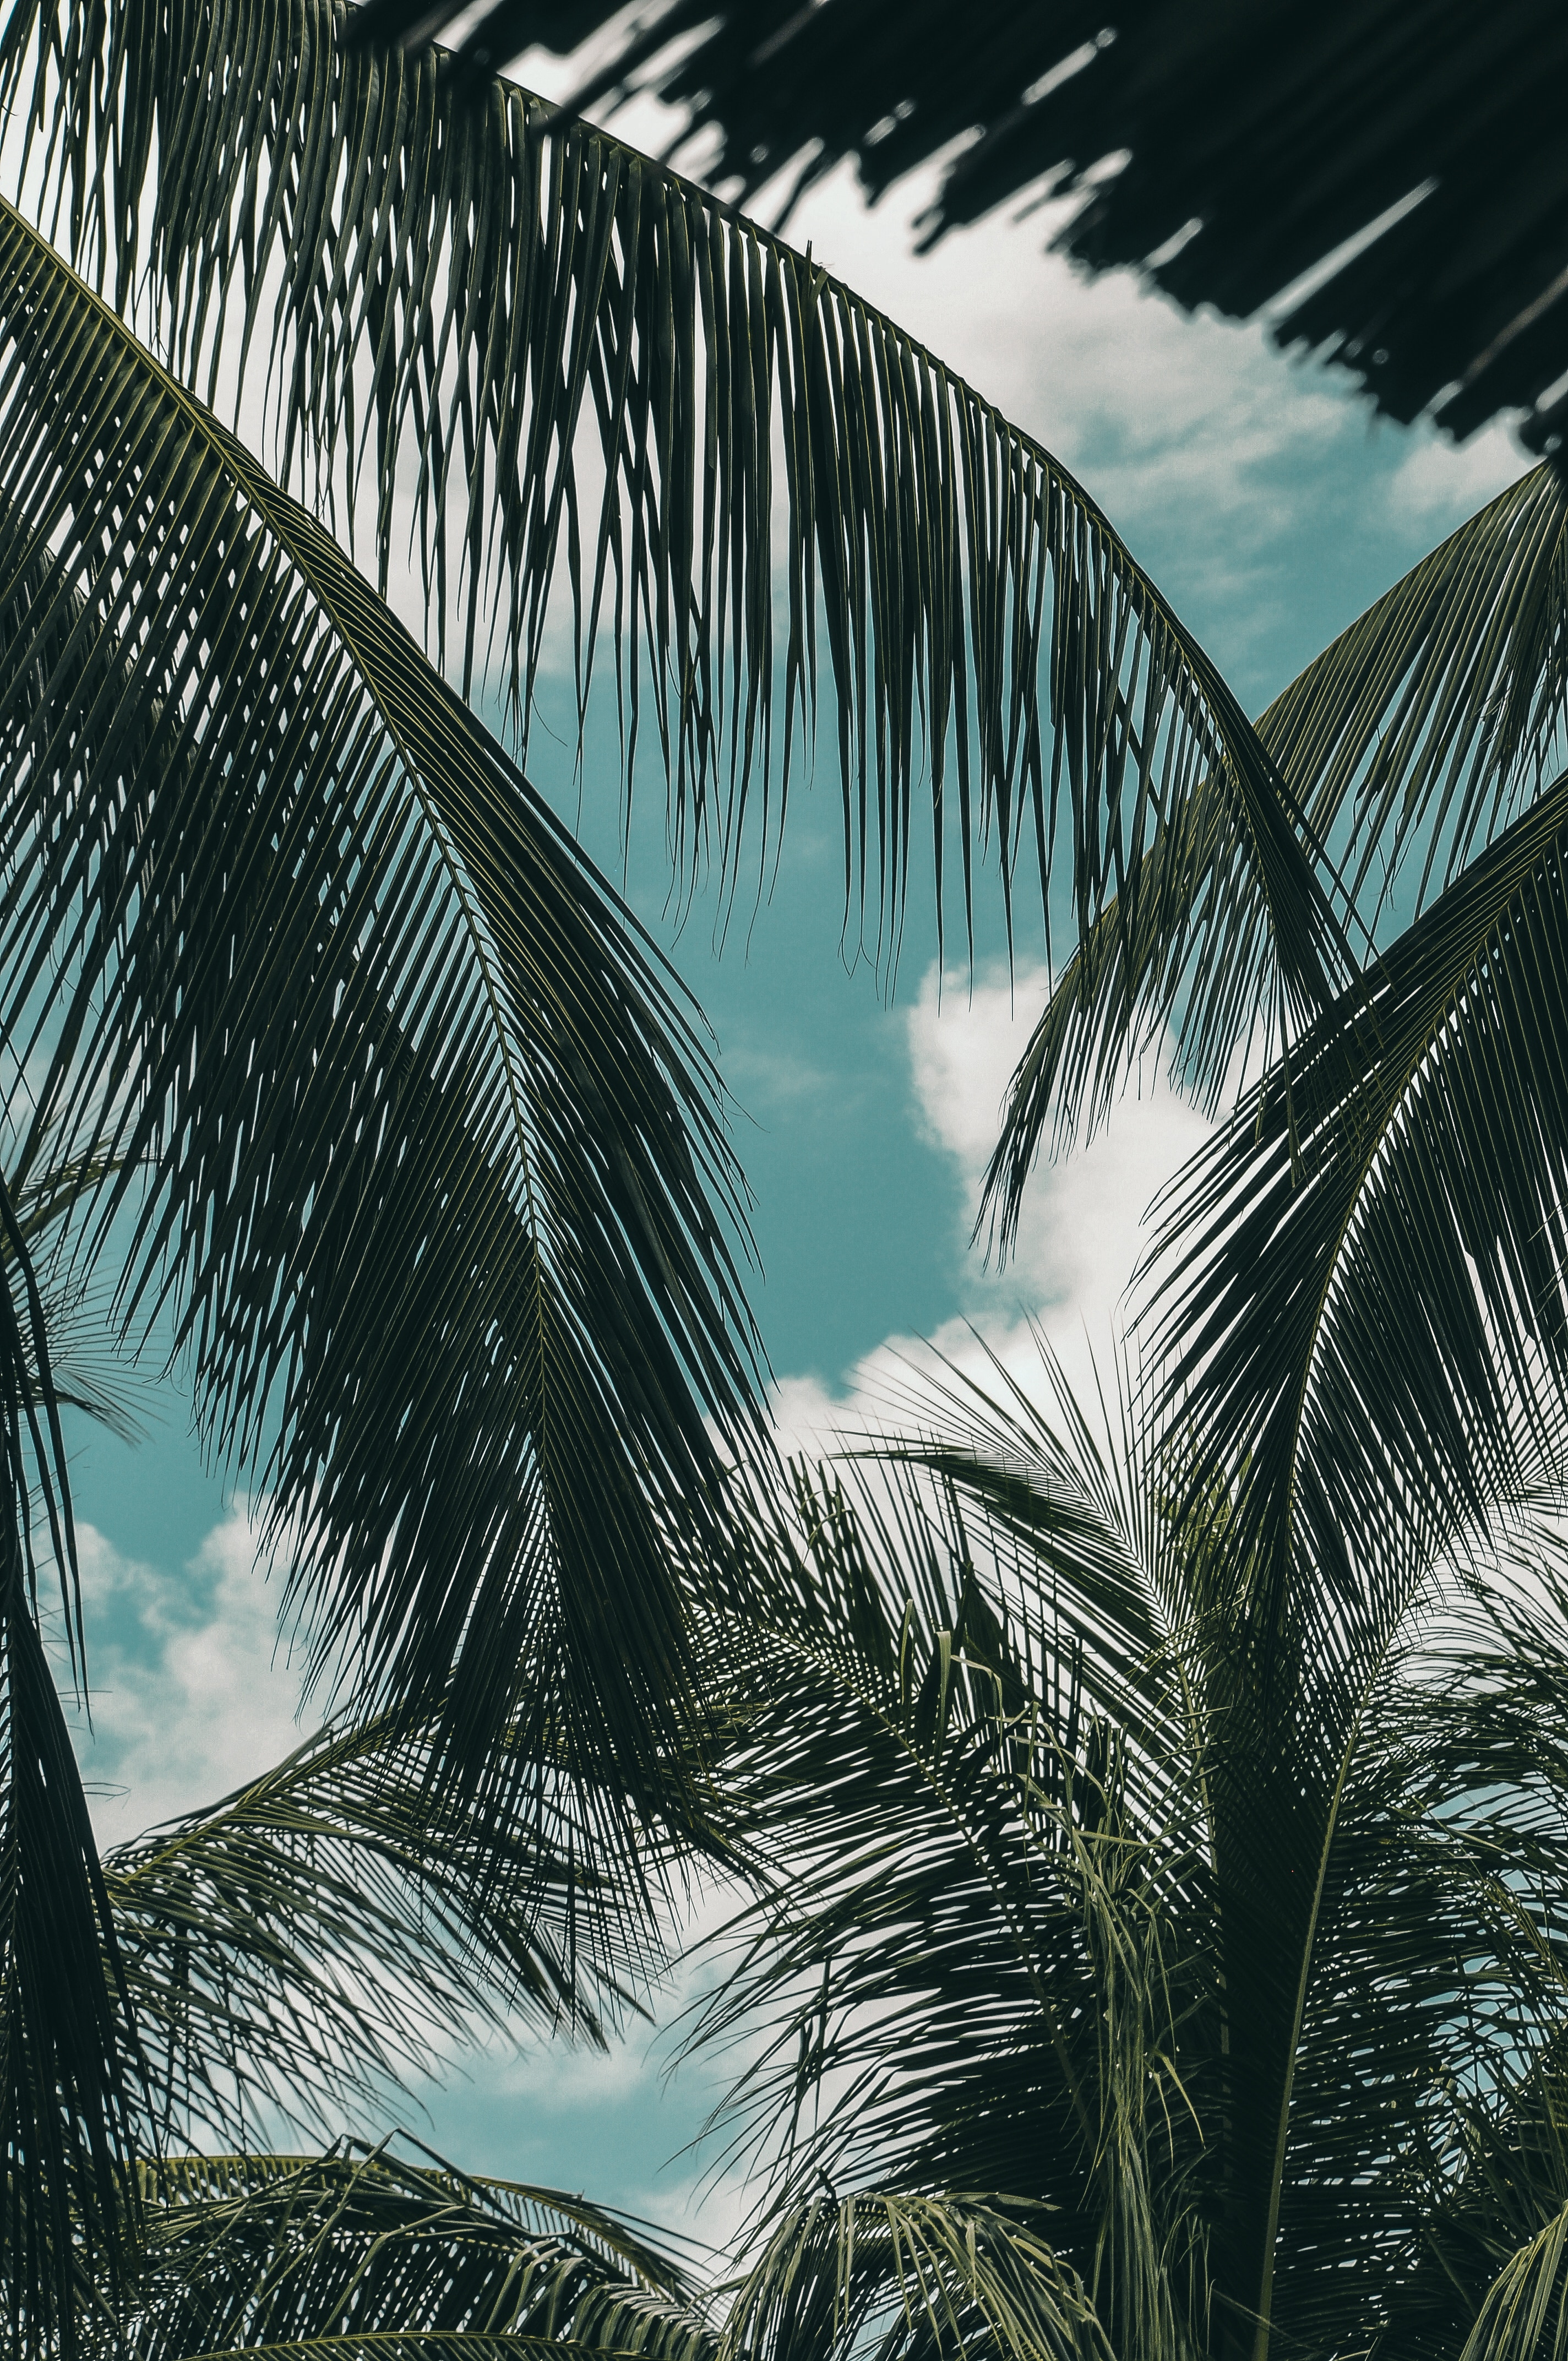 clouds, palm, nature, sky, green, branches, tropics